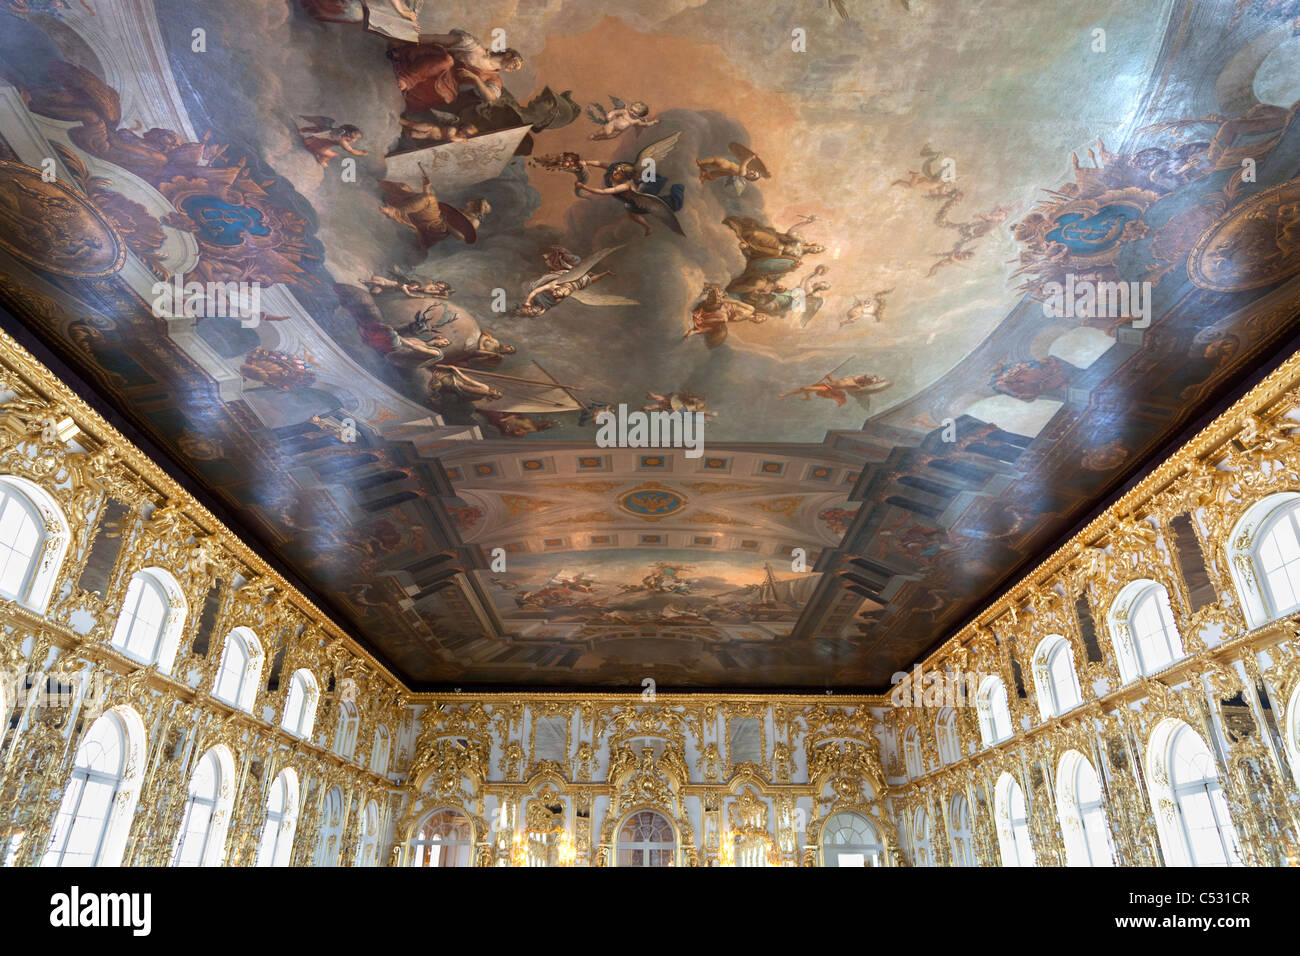 The Catherine Palace, St Petersburg Russia - Great Ballroom Stock Photo